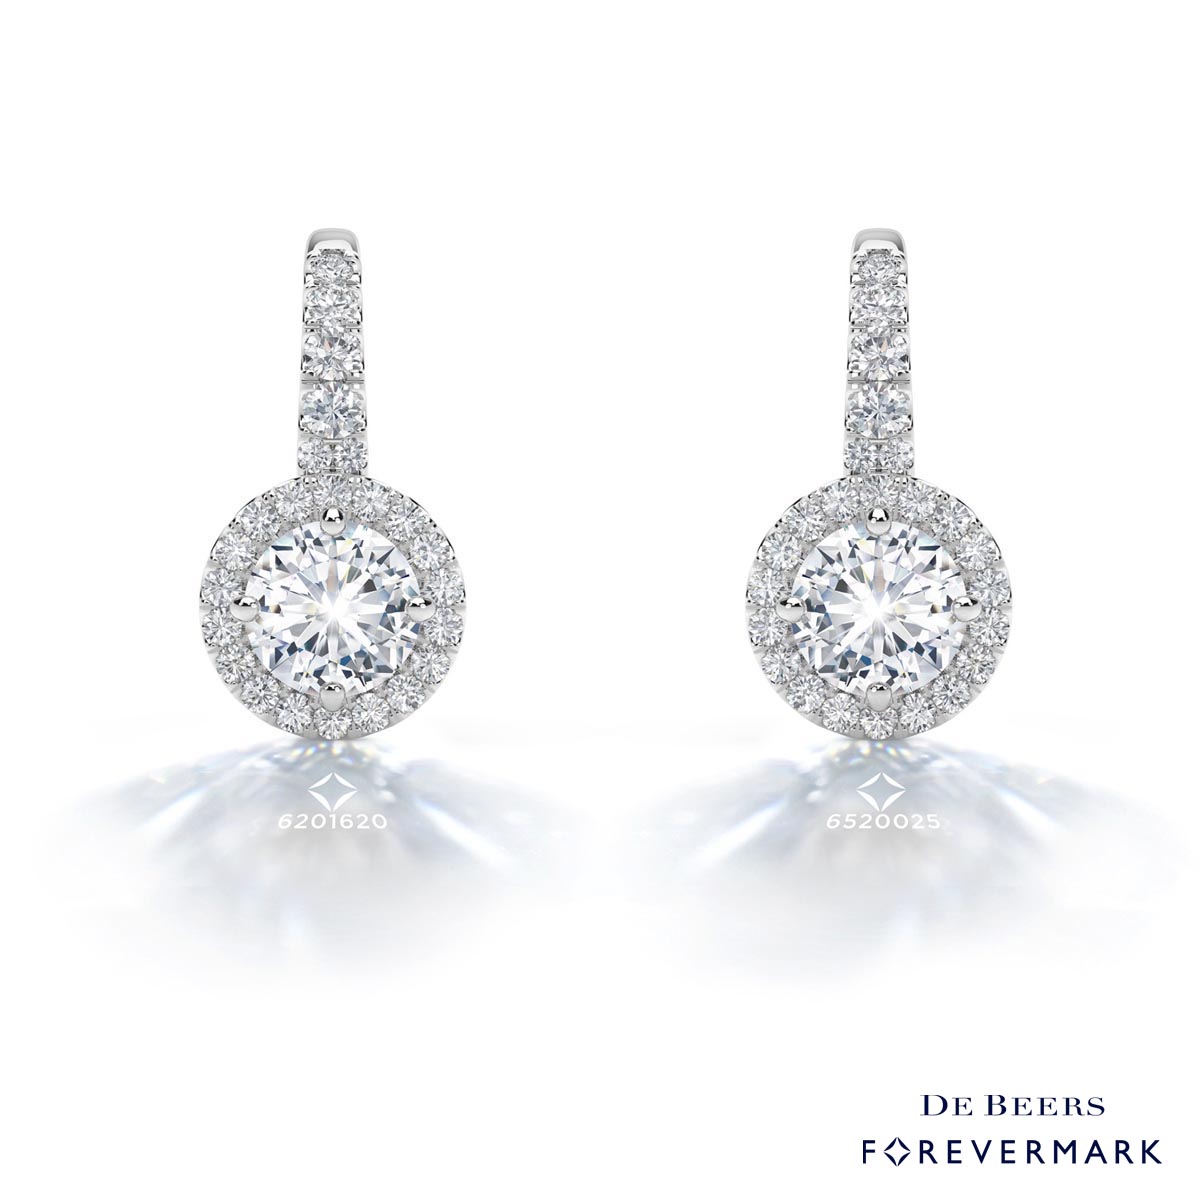 De Beers Forevermark Center of My Universe Diamond Halo Earrings in 18kt White Gold (1ct tw)